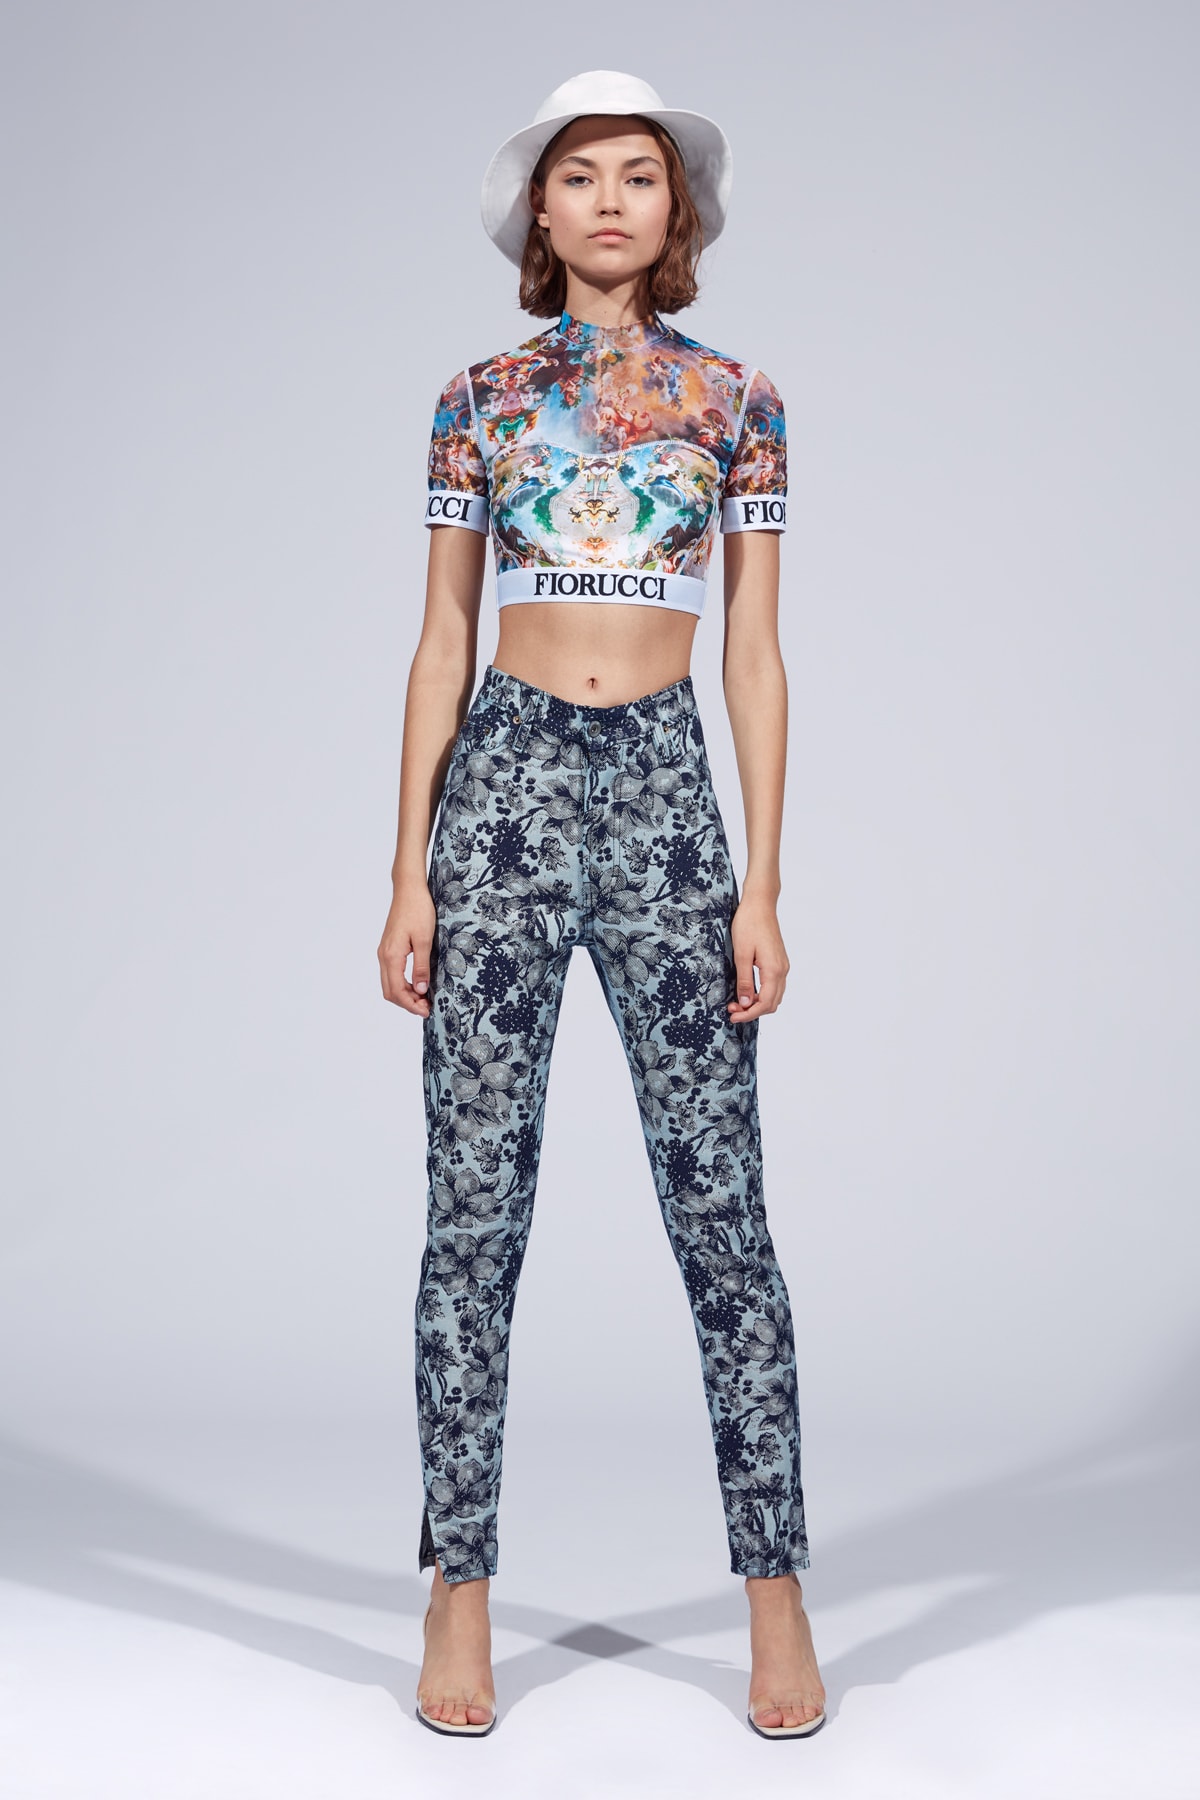 Fiorucci Spring Summer 2019 Collection Lookbook Crop Top Pink White Floral Pants Blue